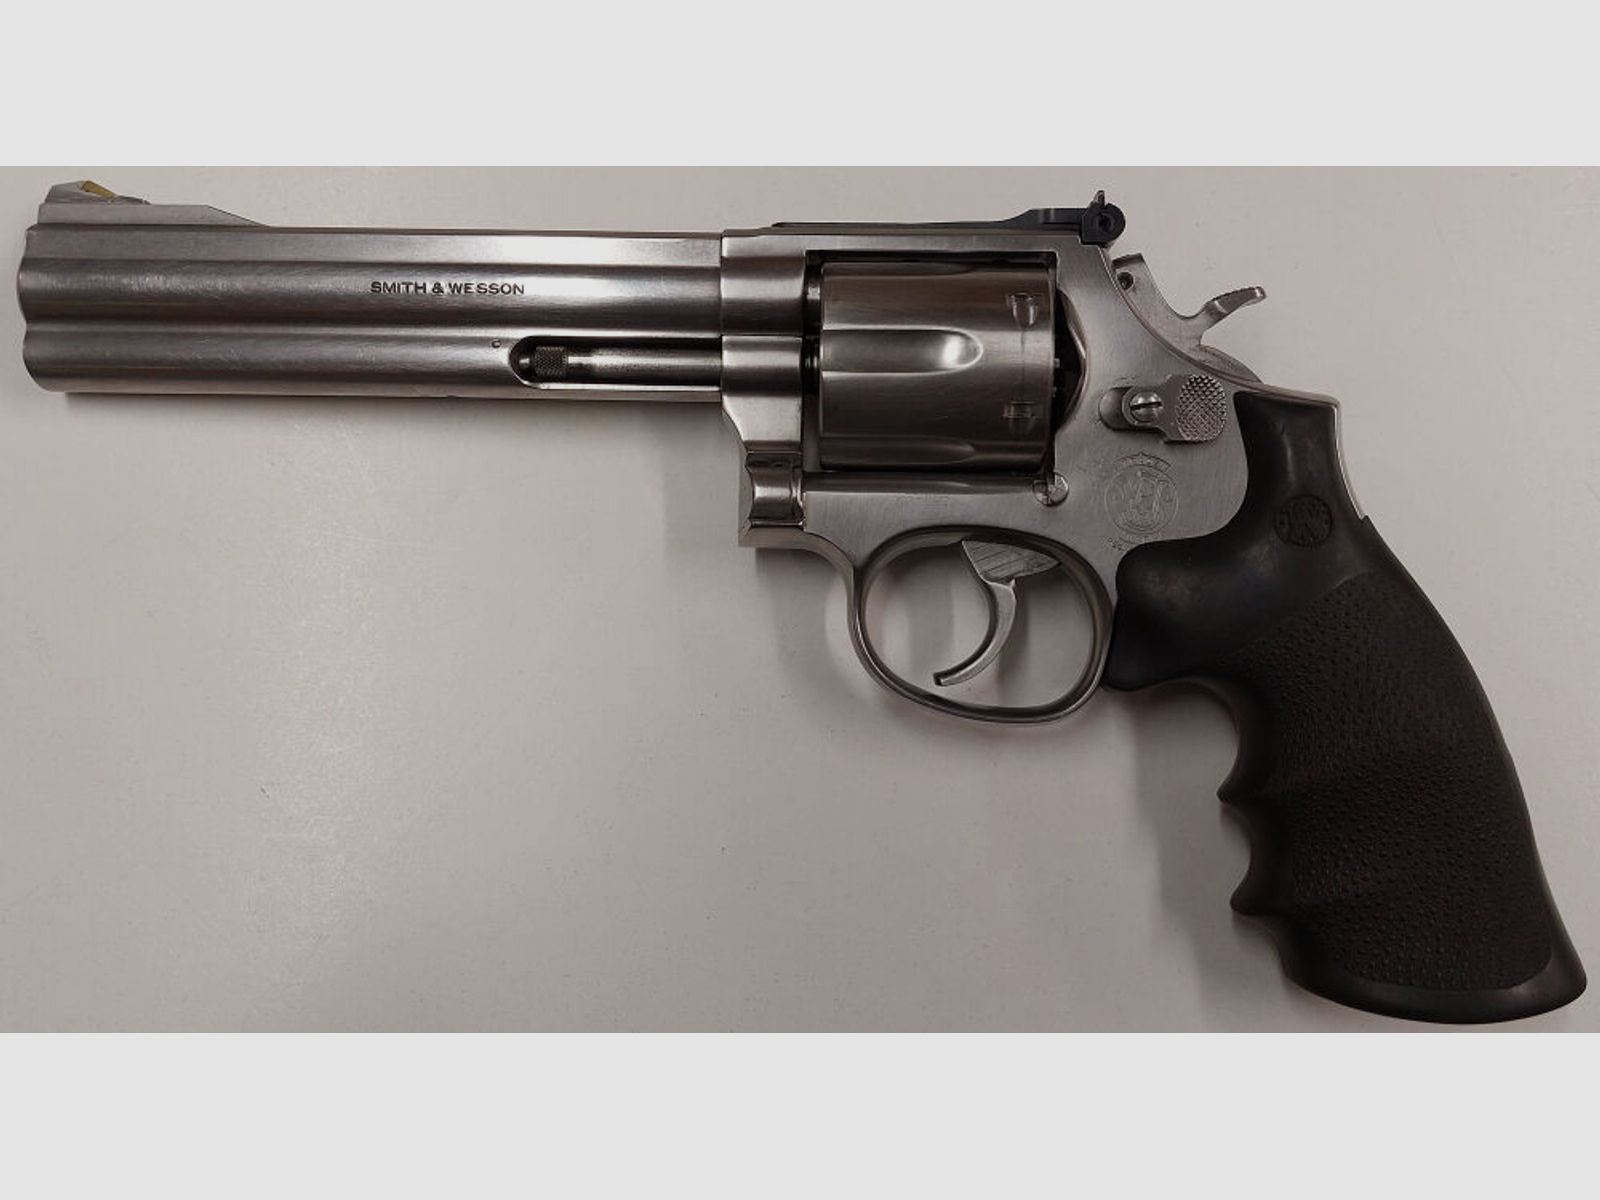 Smith & Wesson	 Sport-/Matchrevolver Smith & Wesson Mod.686-4 Stainless Steel 6" im Kaliber .357Mag.